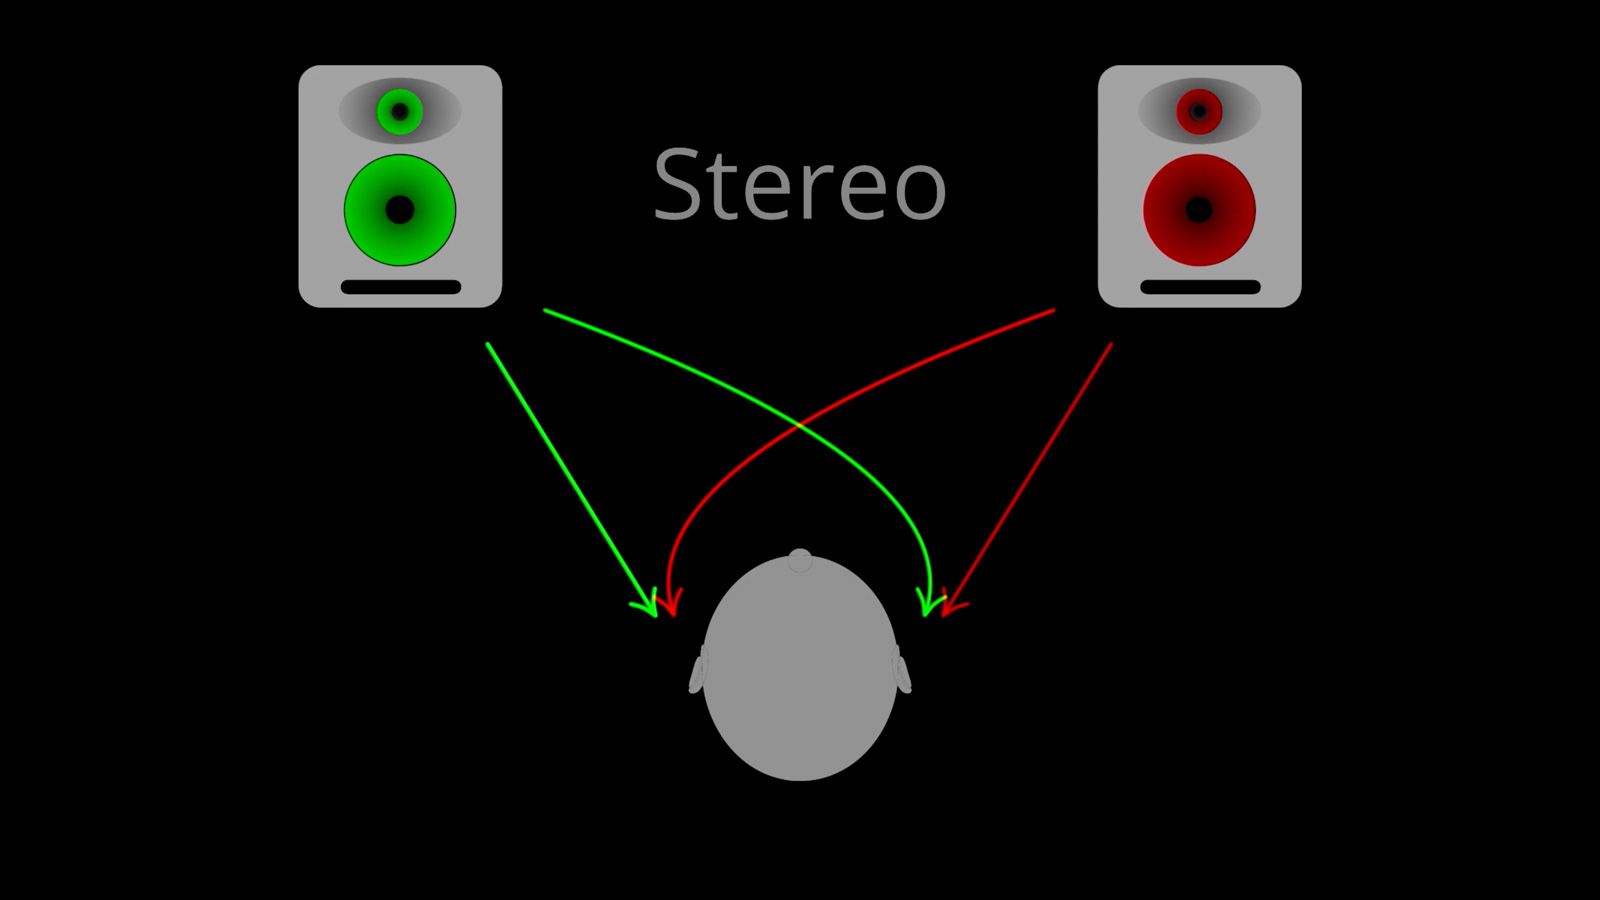 How to mix in stereo without sucking in mono – 2/3